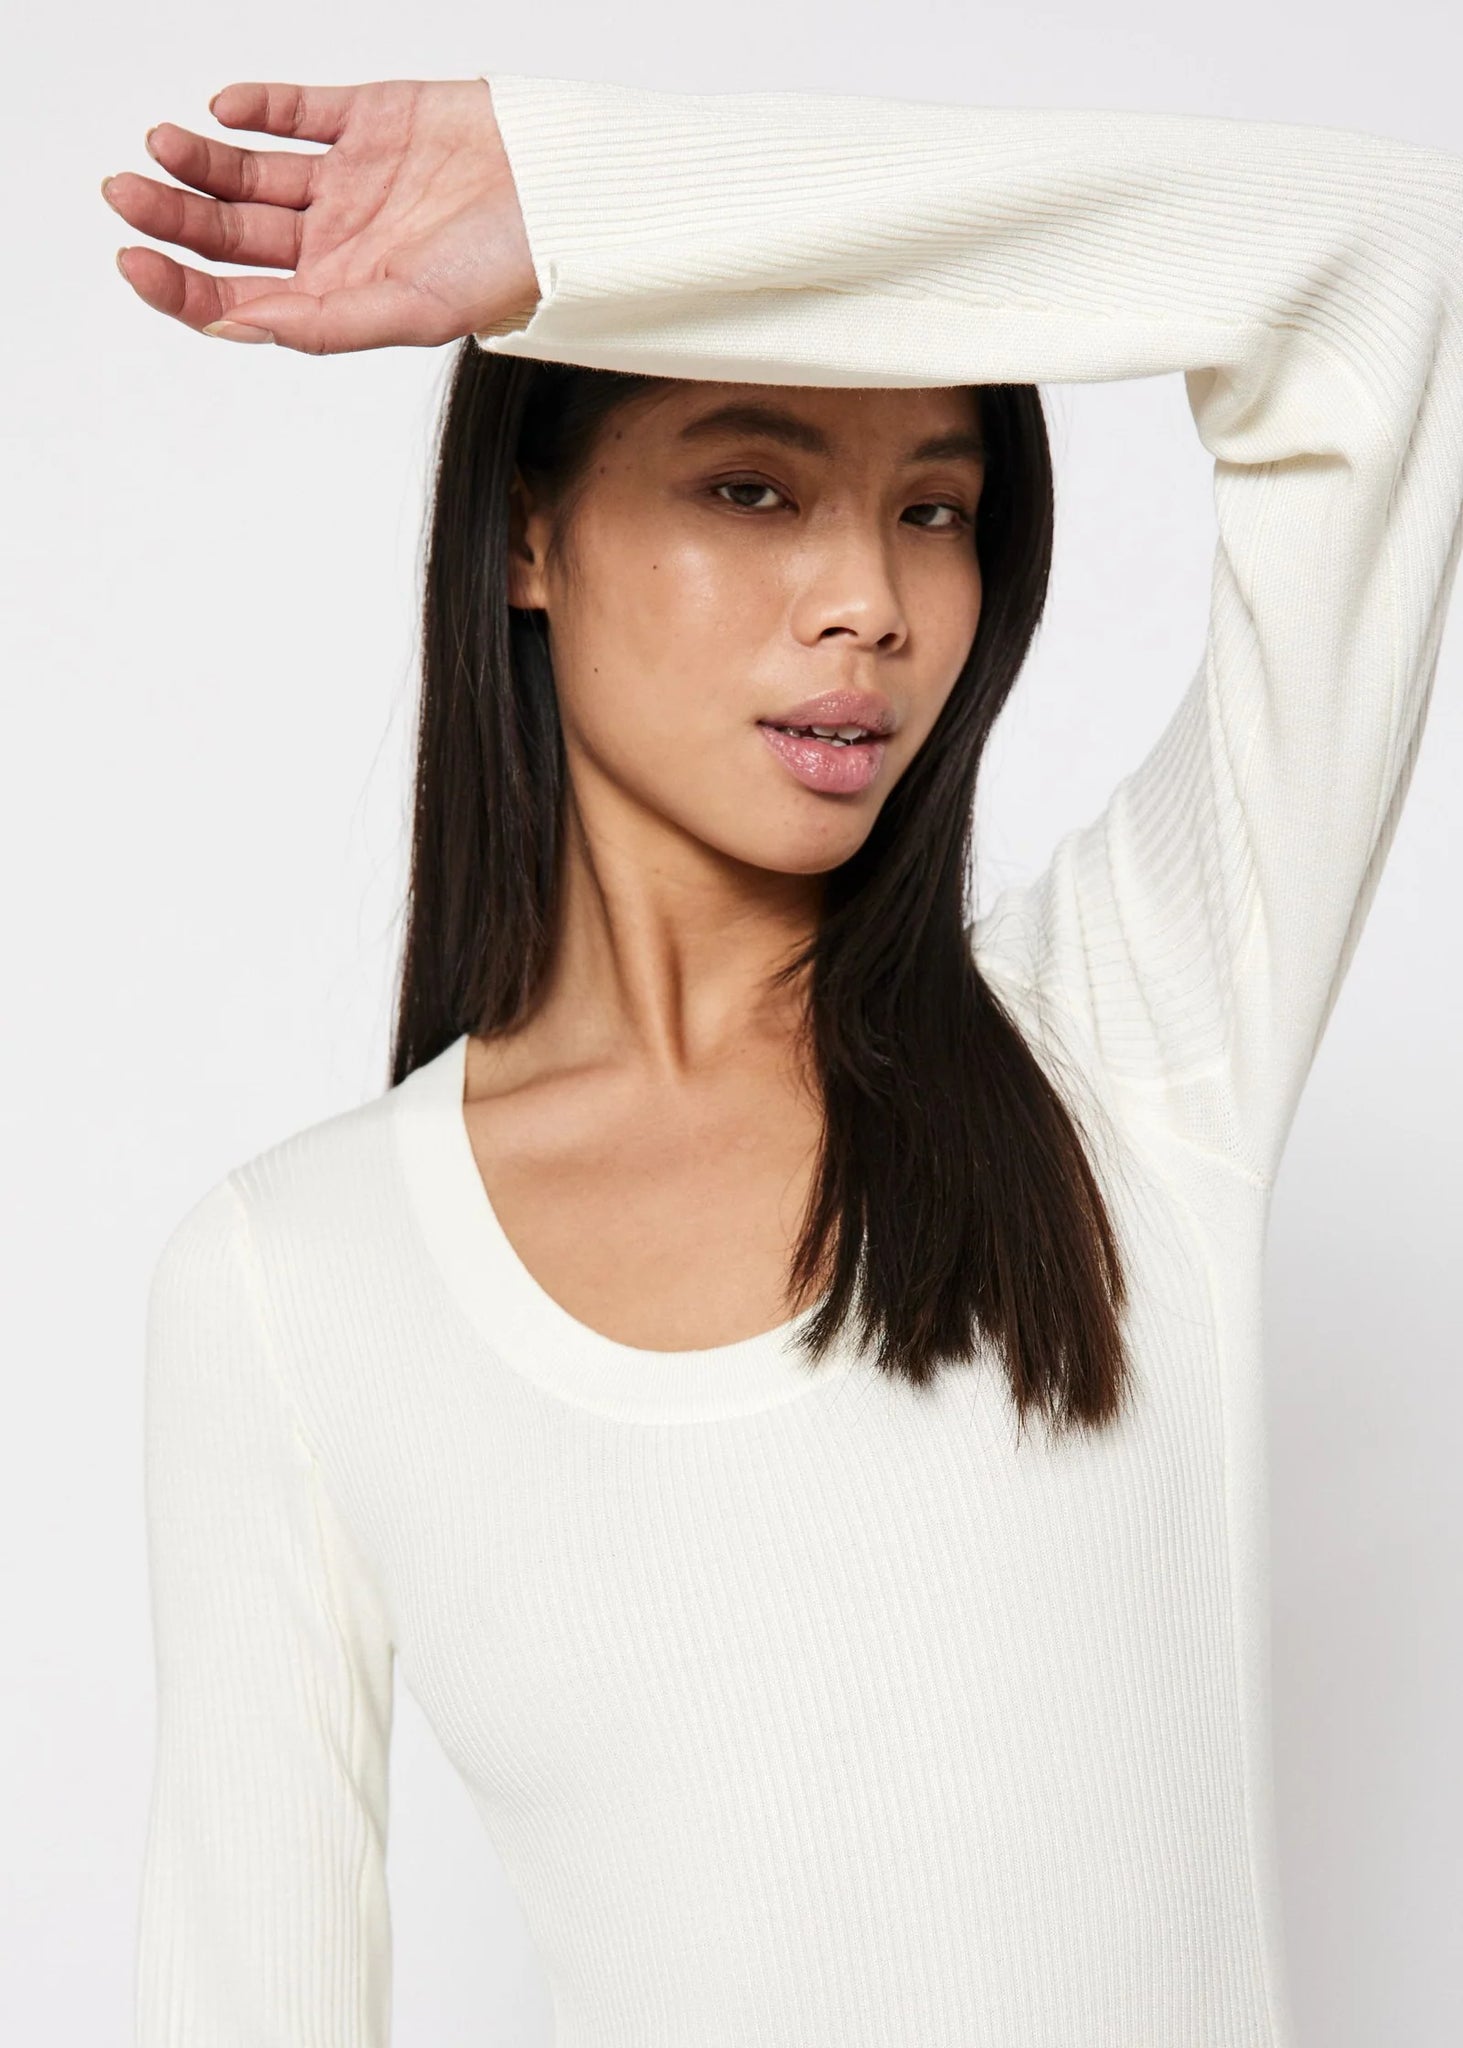 Sherry flared knit dress in off white